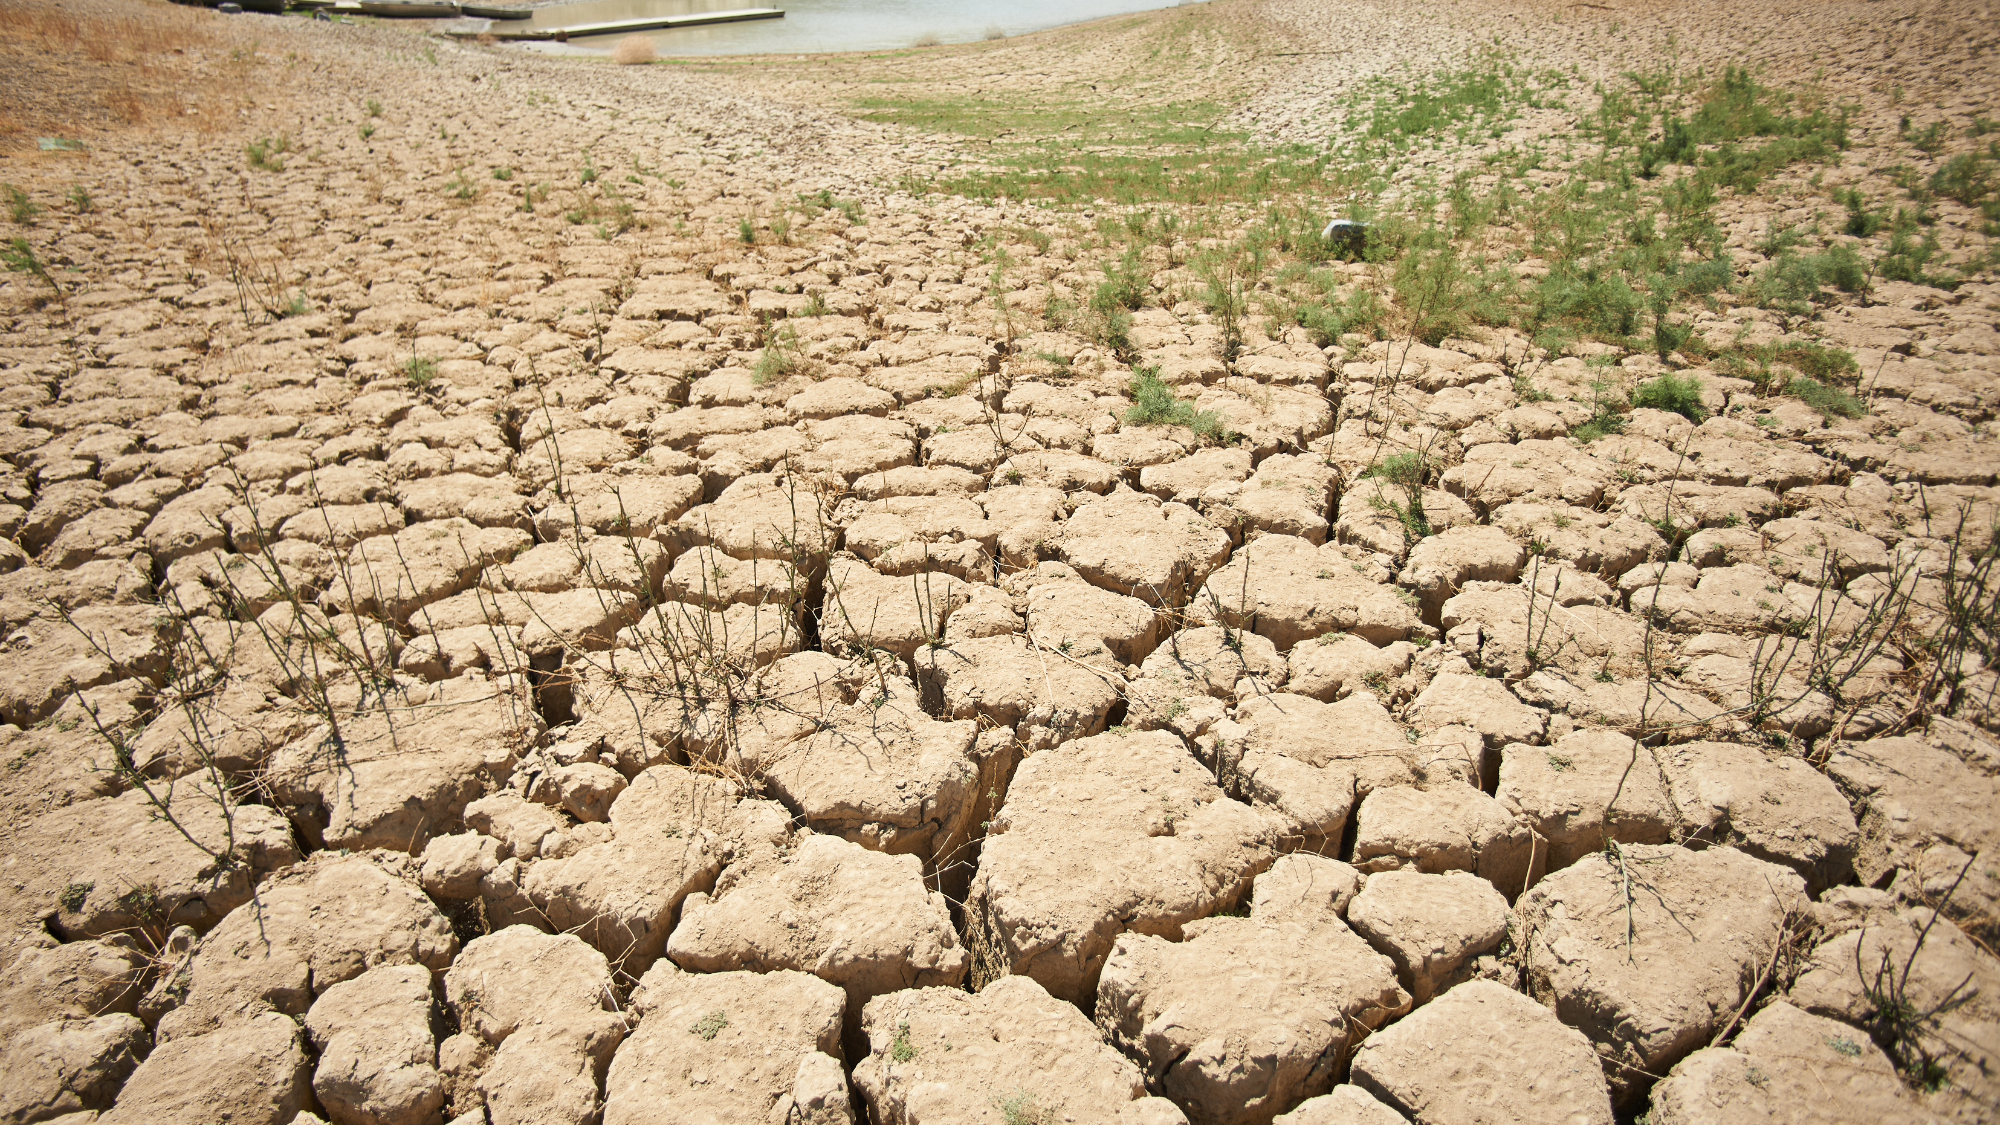 Vegetation makes its way through the drought-ridden earth on the shores of the Viñuela reservoir in Spain. The reservoir feeds the tropical crops of Axarquía, such as mangoes and avocados. It is in a phase of desiccation, with no water inflow, but consumption that has led the municipalities of Málaga to impose restrictions on the consumption of drinking water.